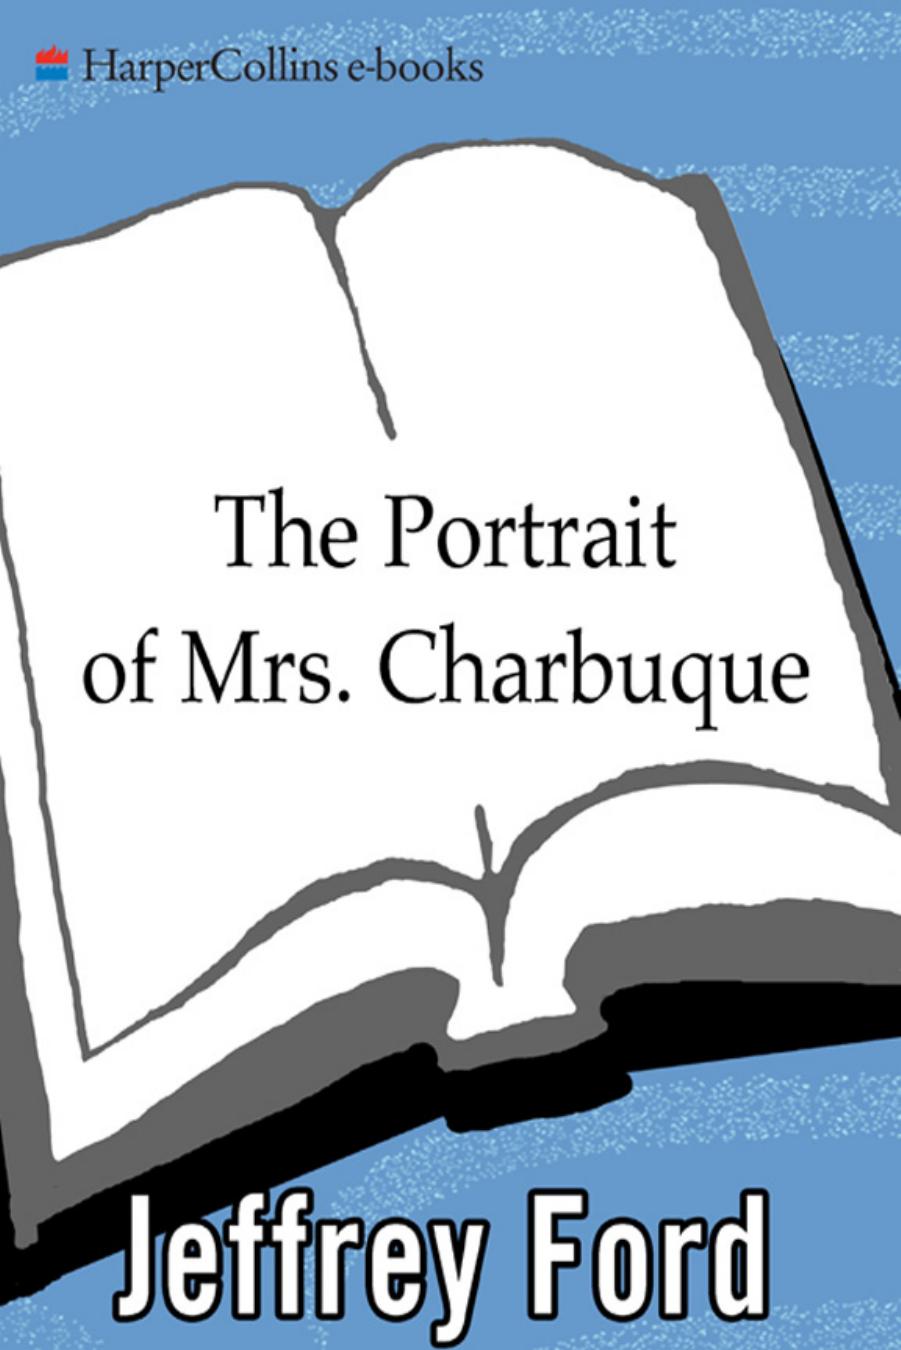 The Portrait of Mrs. Charbuque by Jeffrey Ford